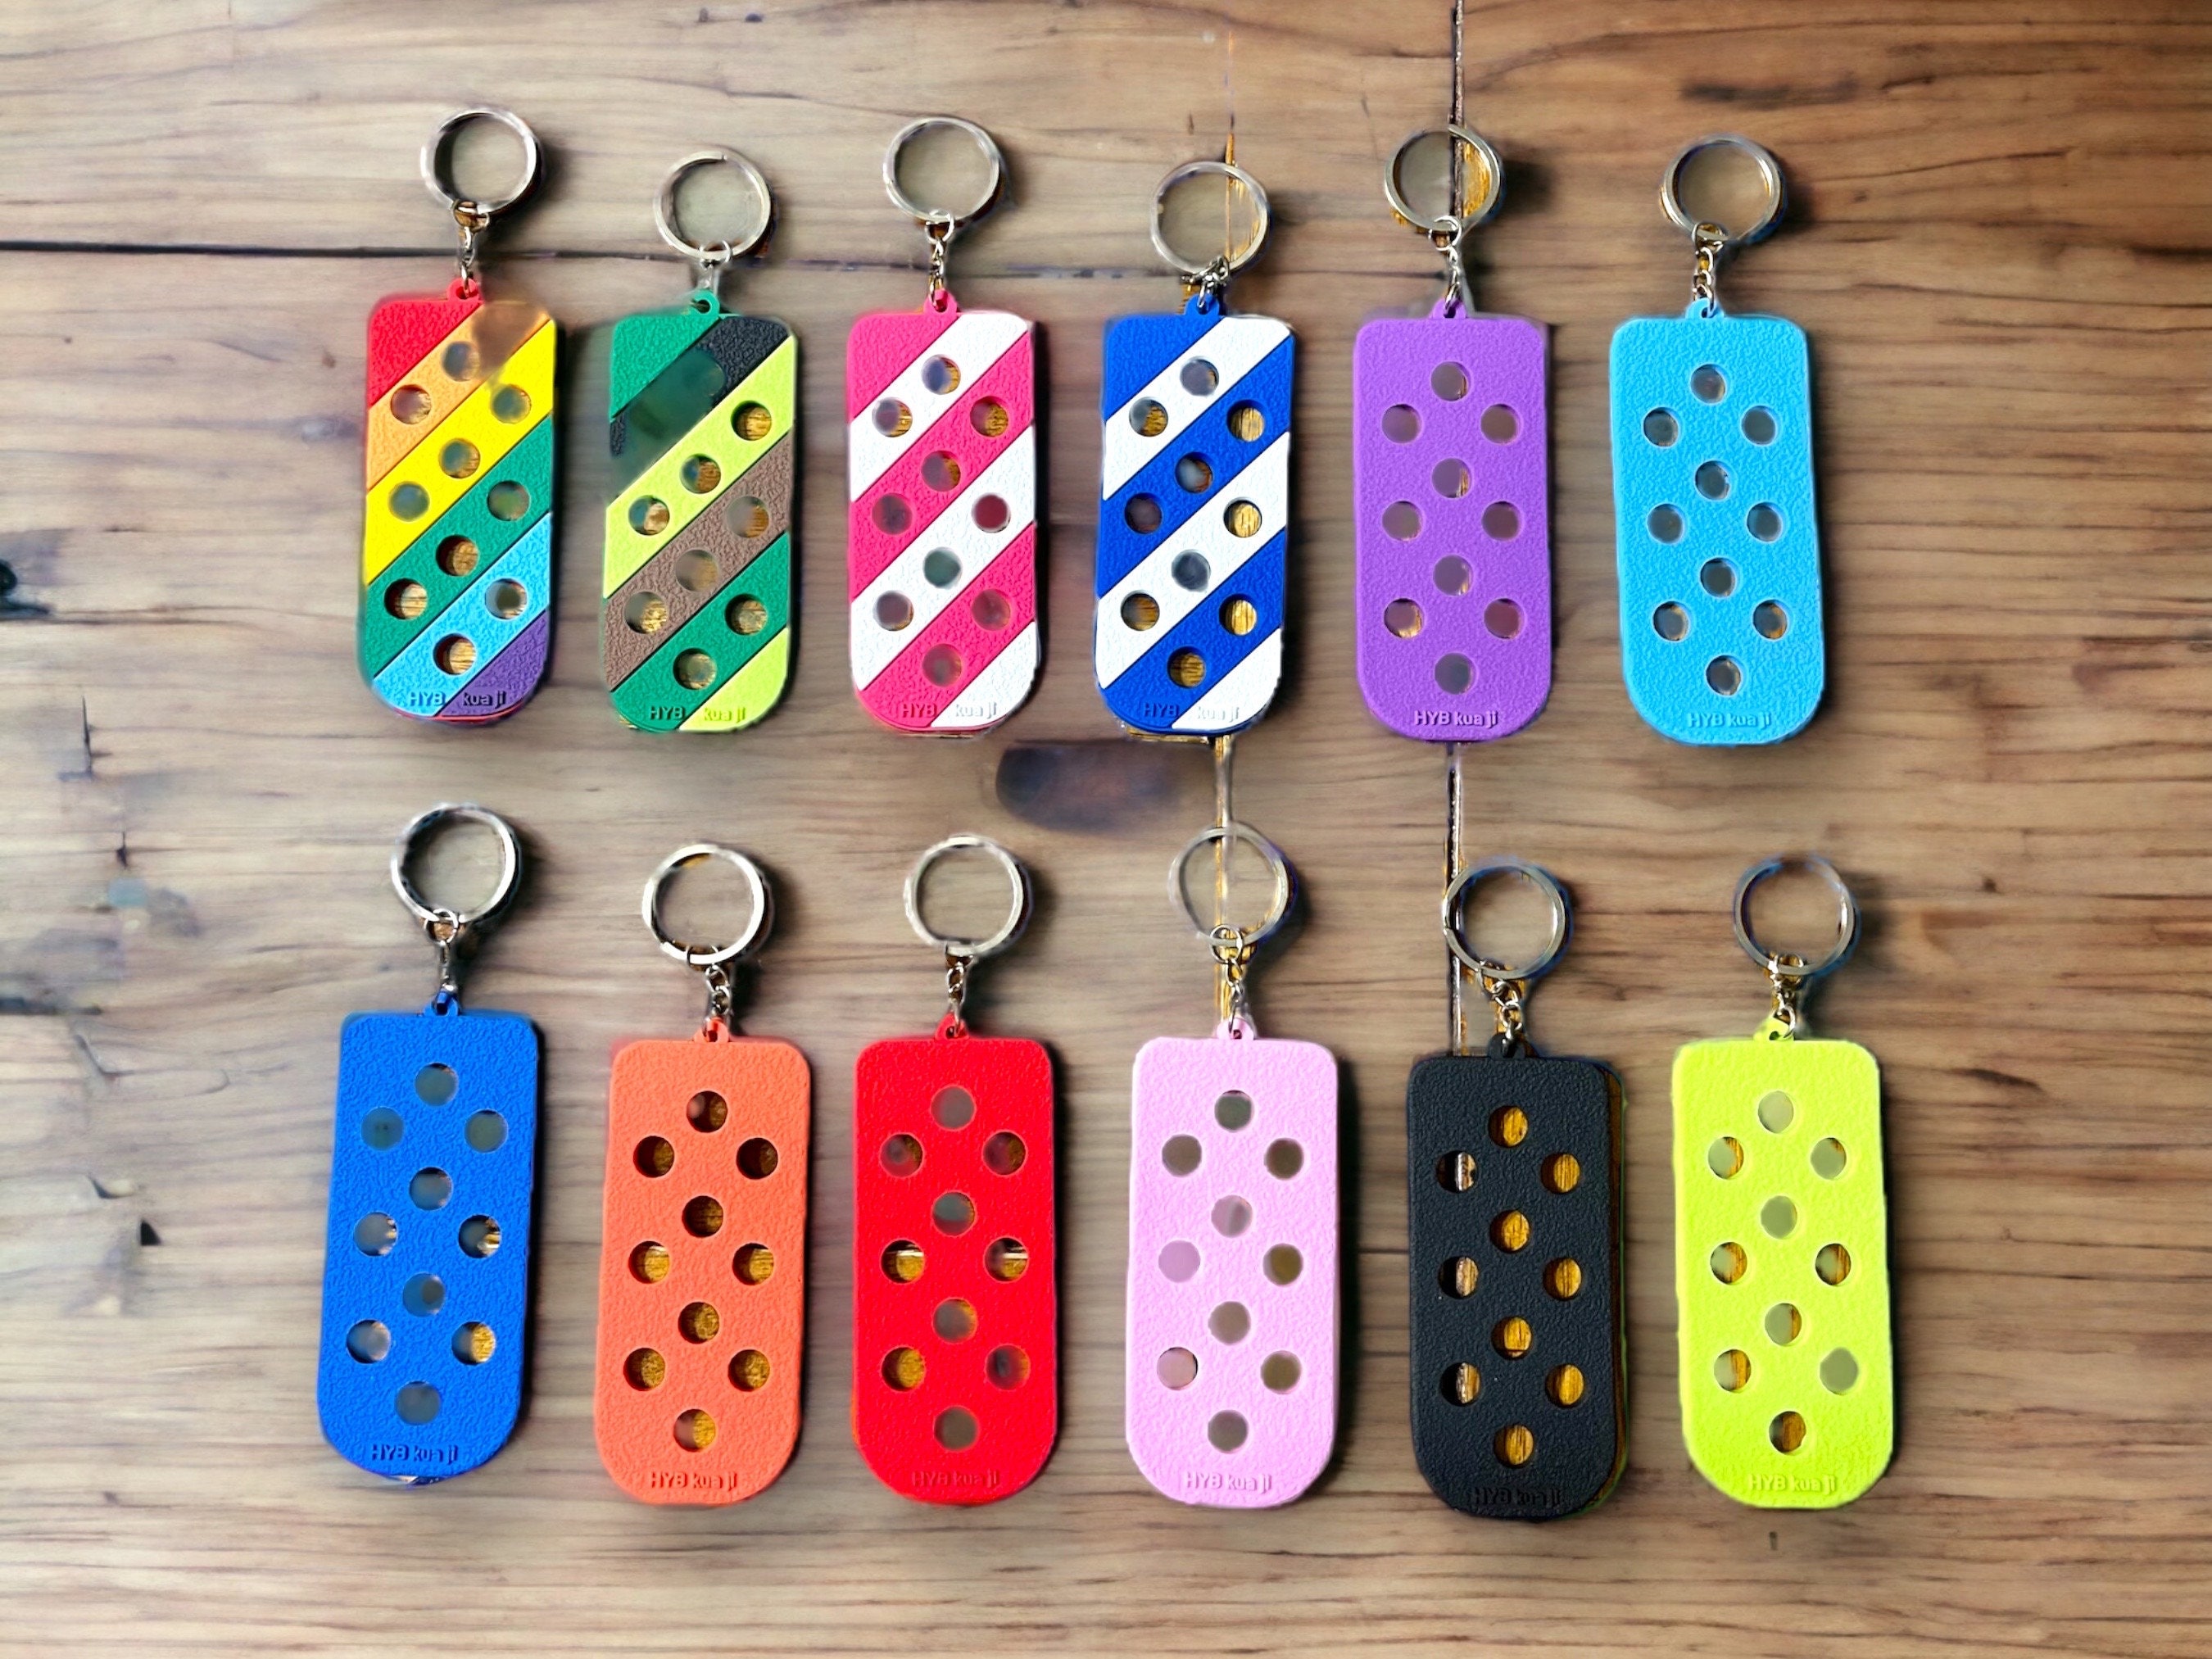 1pcs Keychain with Holes DIY Key Chain for Croc Charms Croc Jeans Storage  Key Board Soft Key Ring fit Clog Pins